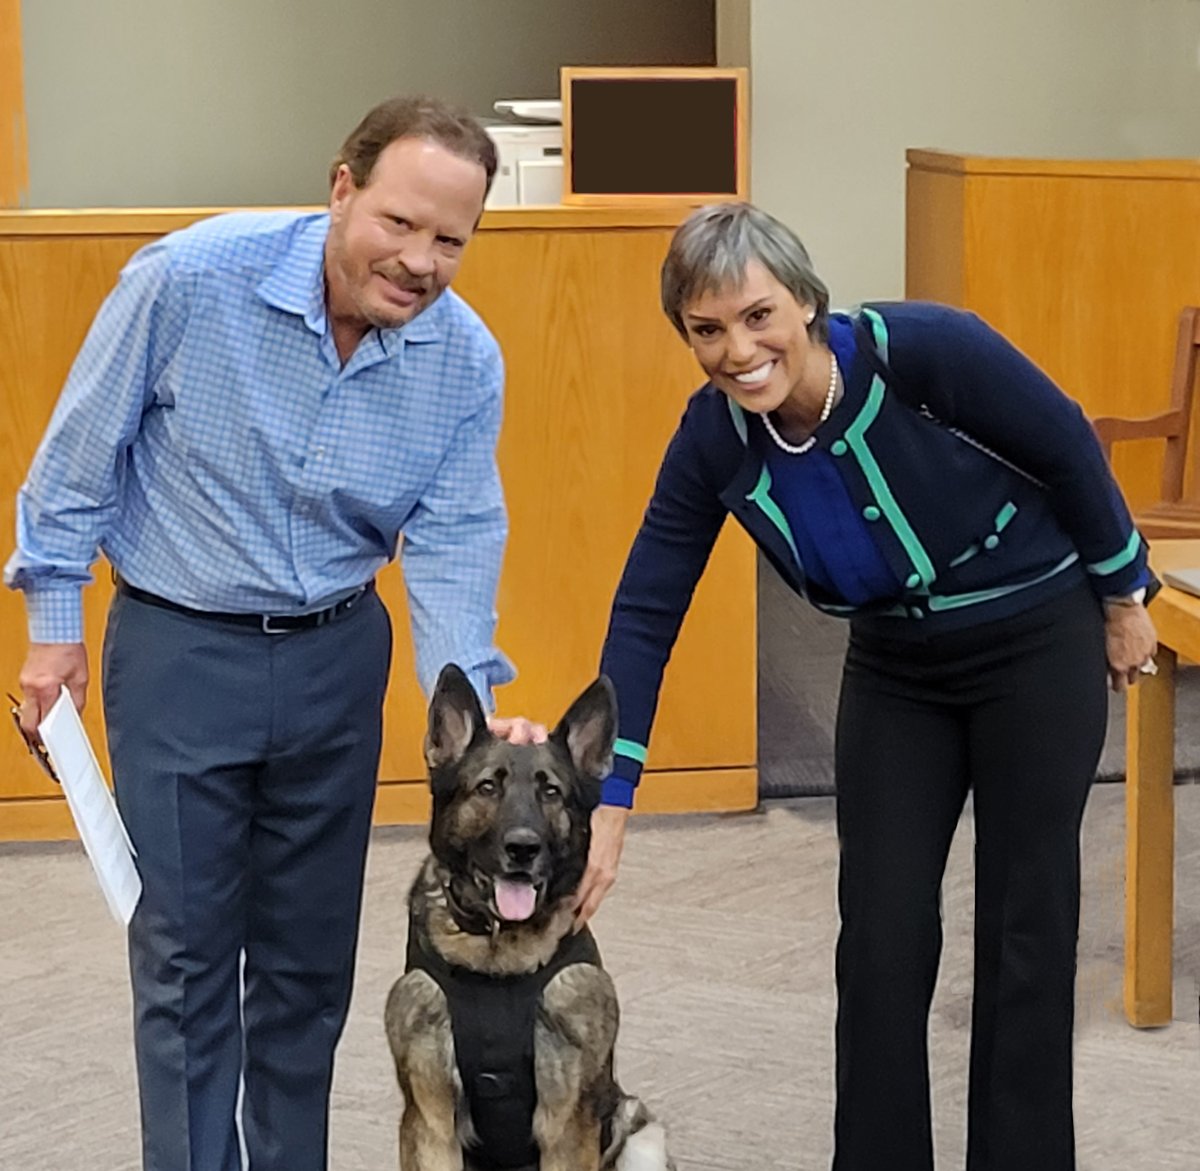 Thank you to Myrtle Beach residents, Greg and Gina Snyder, who donated $15,000 to @MBPDSC to add a K9 to the K-9 Unit!